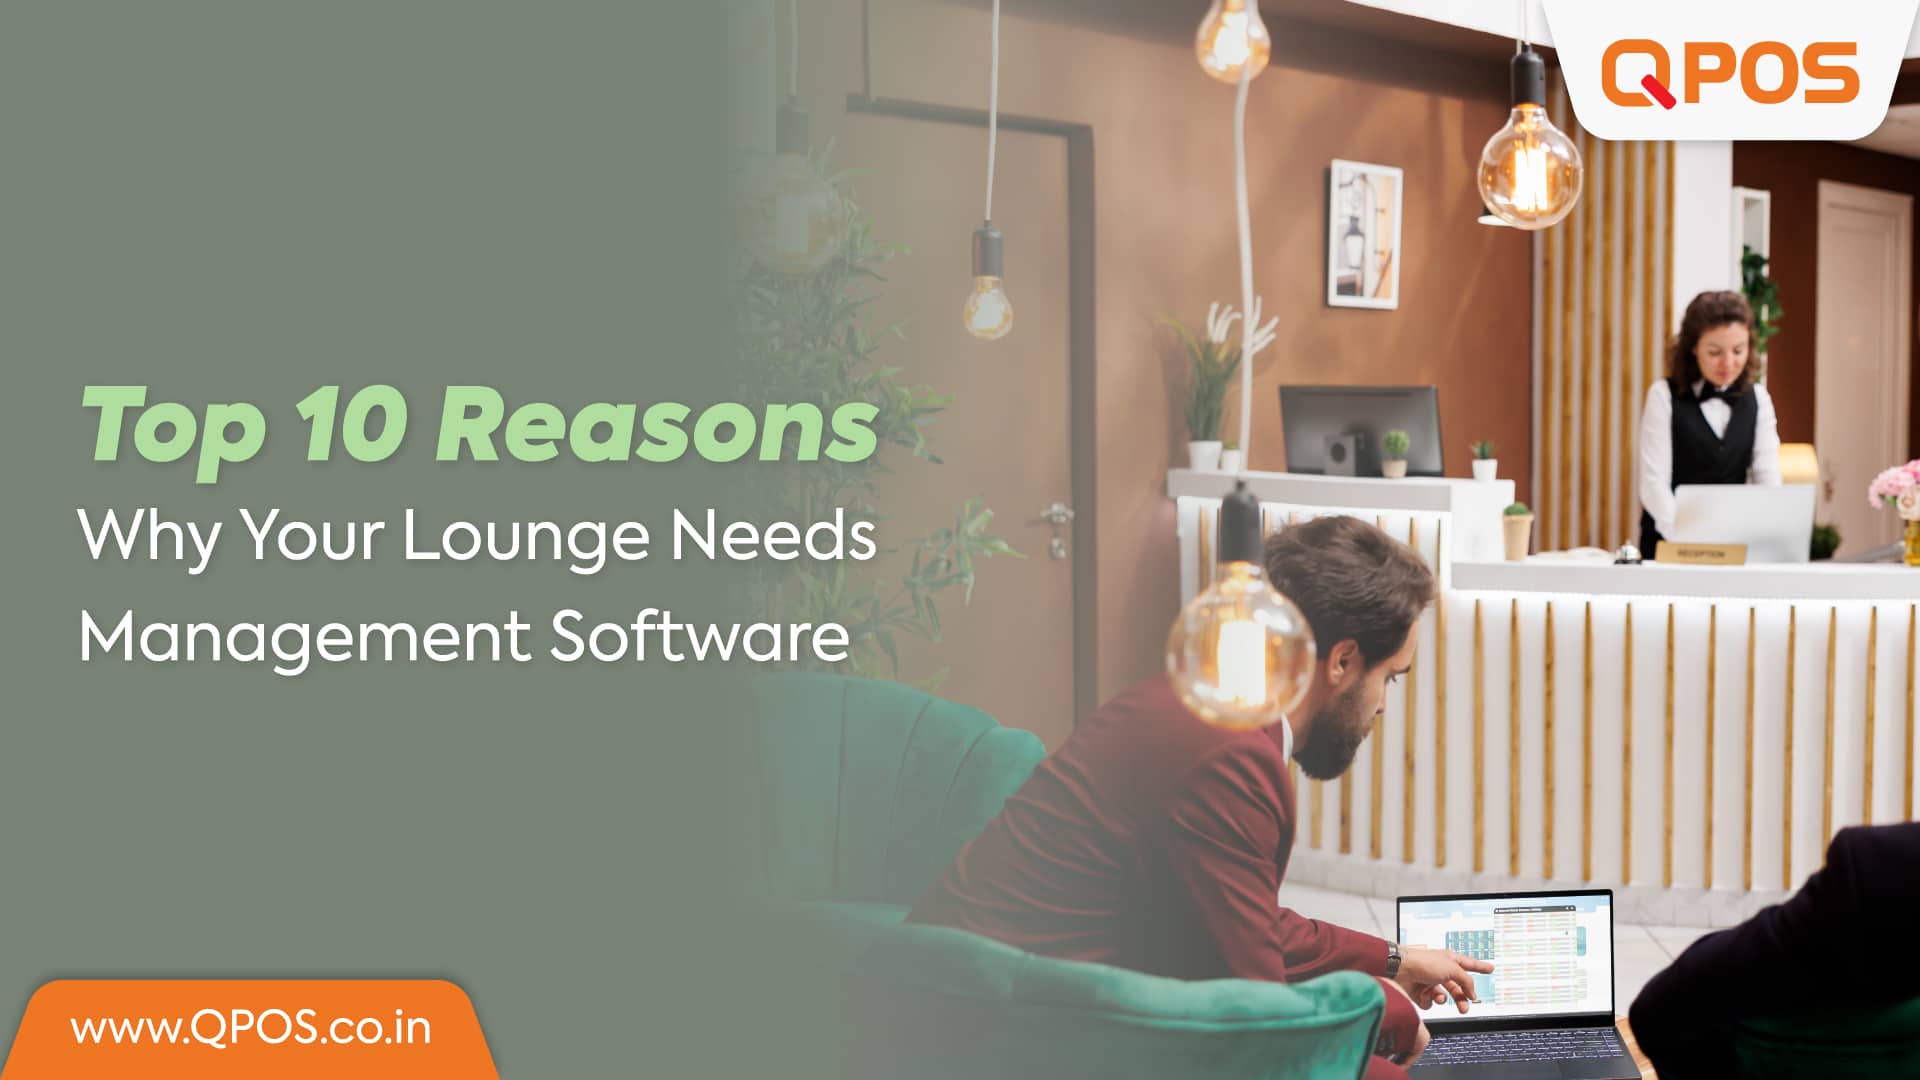 Why Your Lounge Needs Management Software